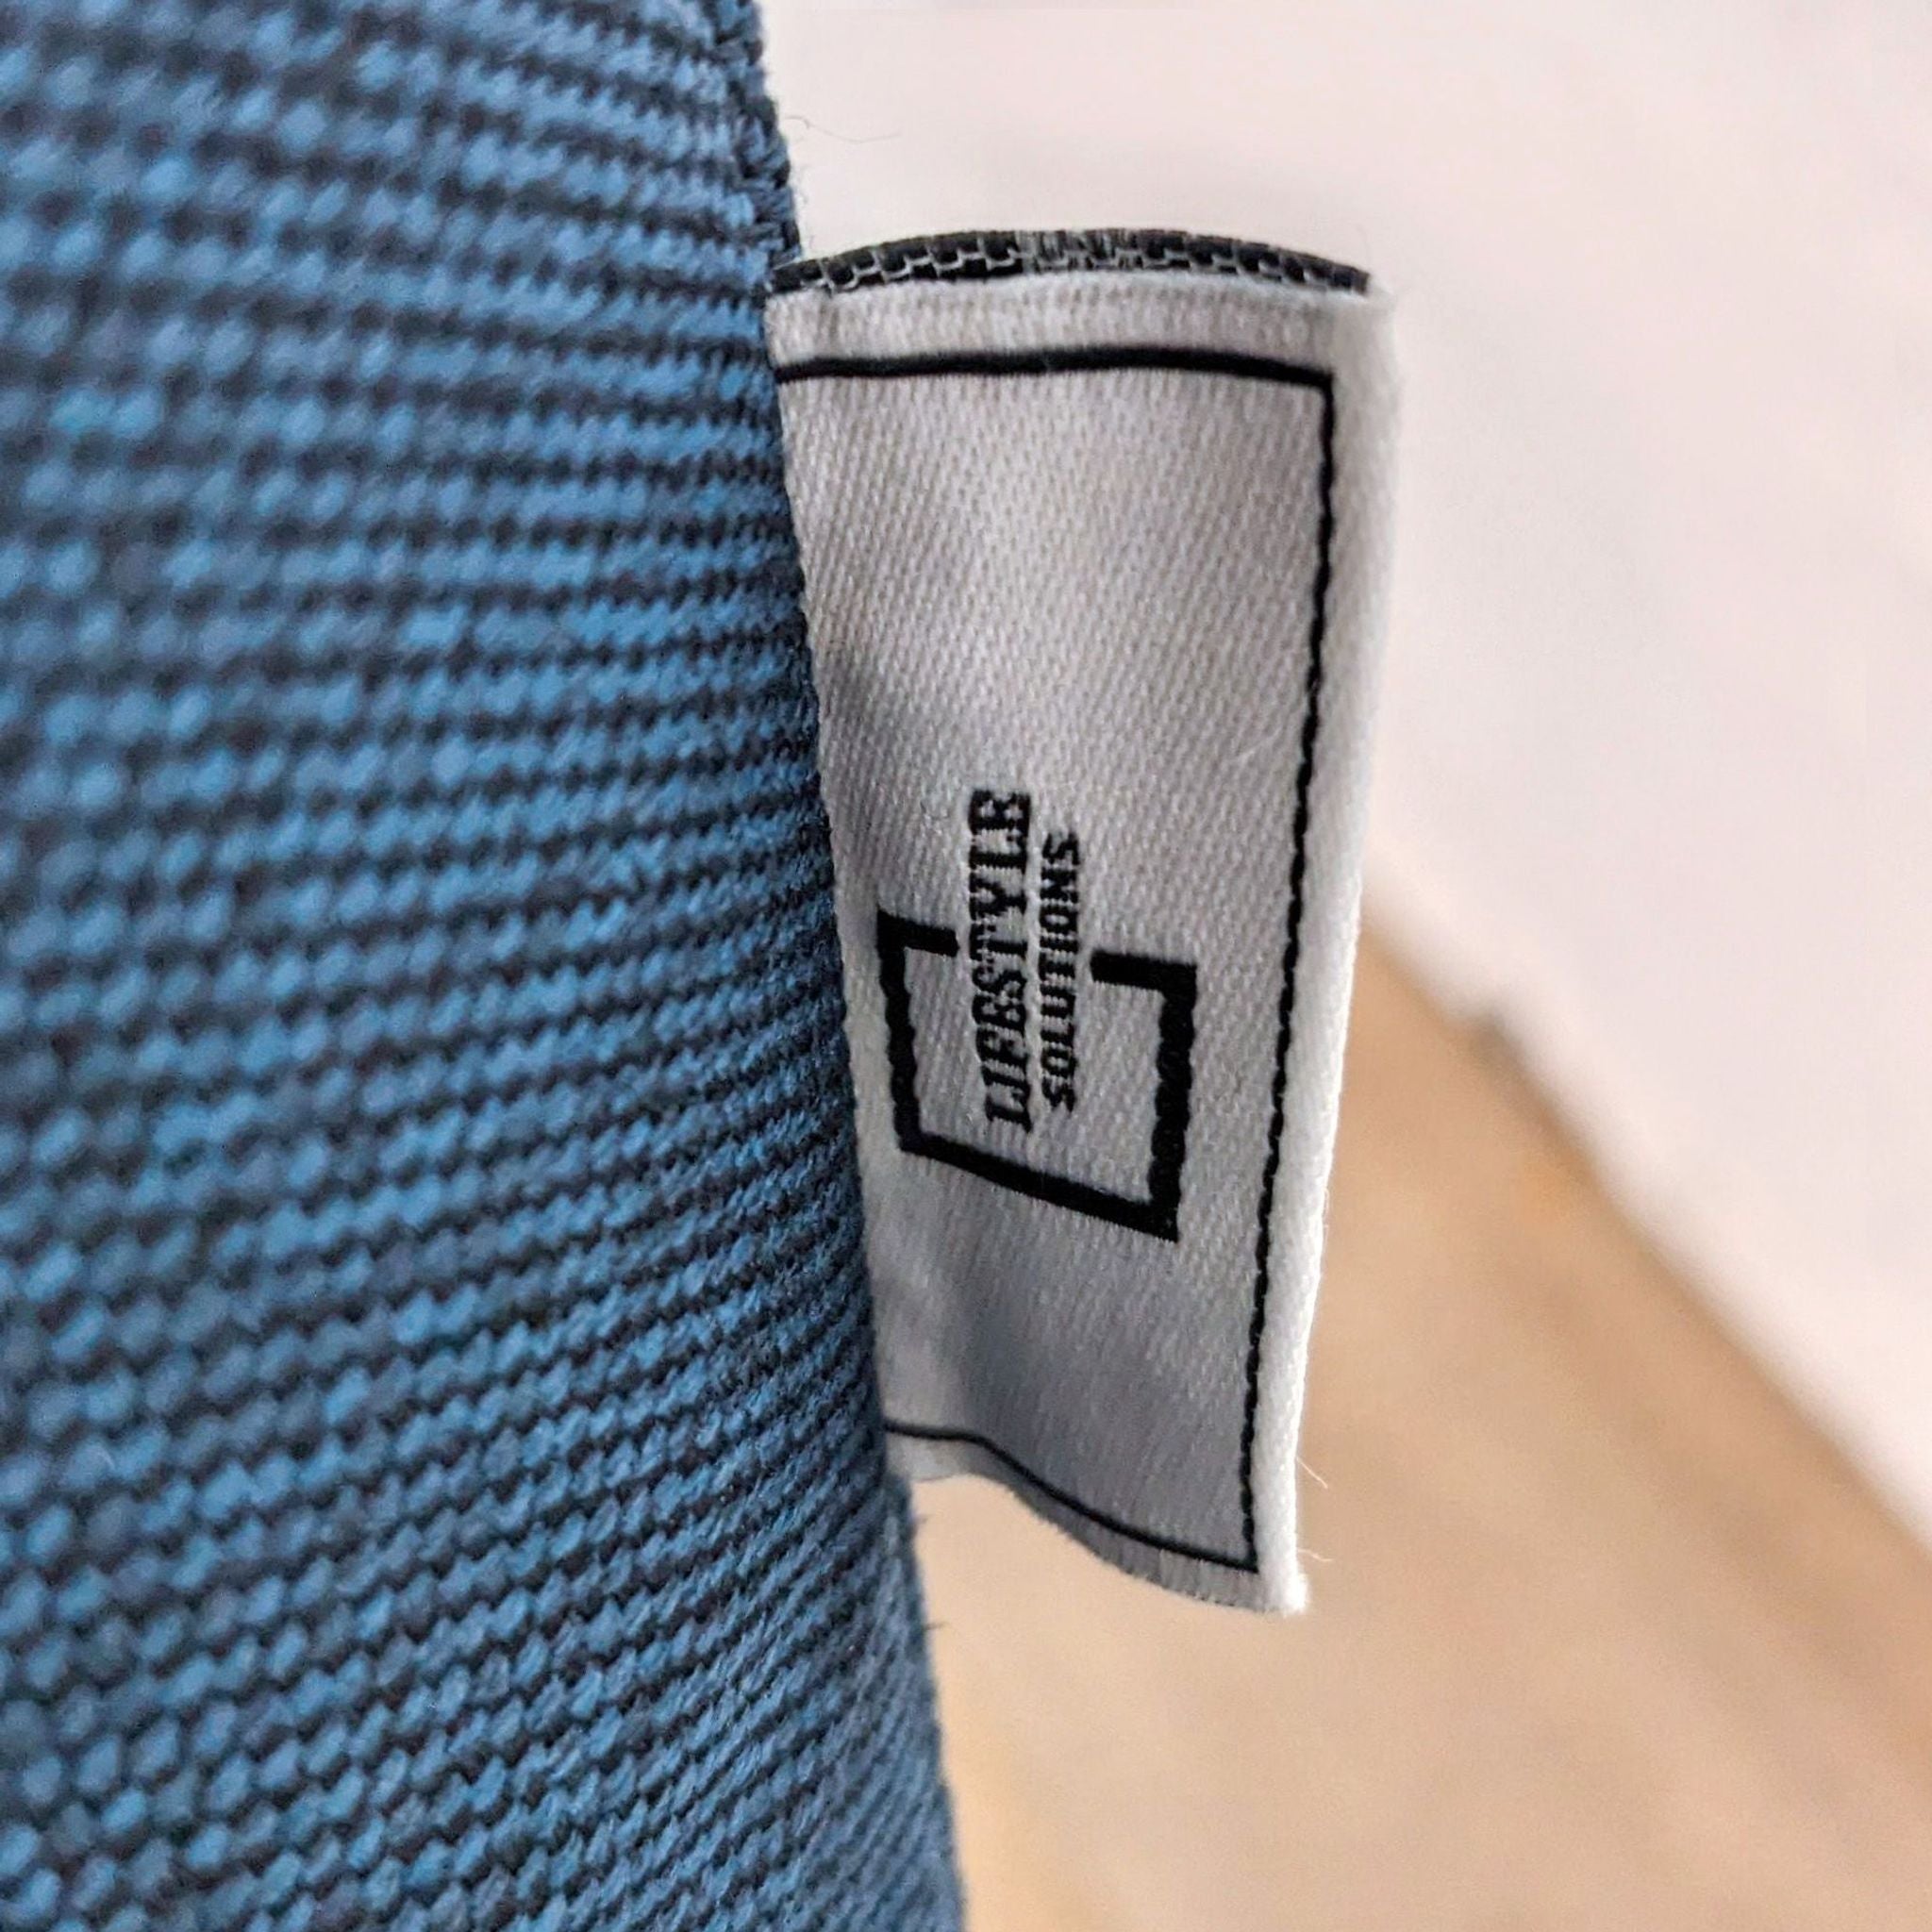 Close-up of a blue fabric with a Lifestyle Solutions brand tag.